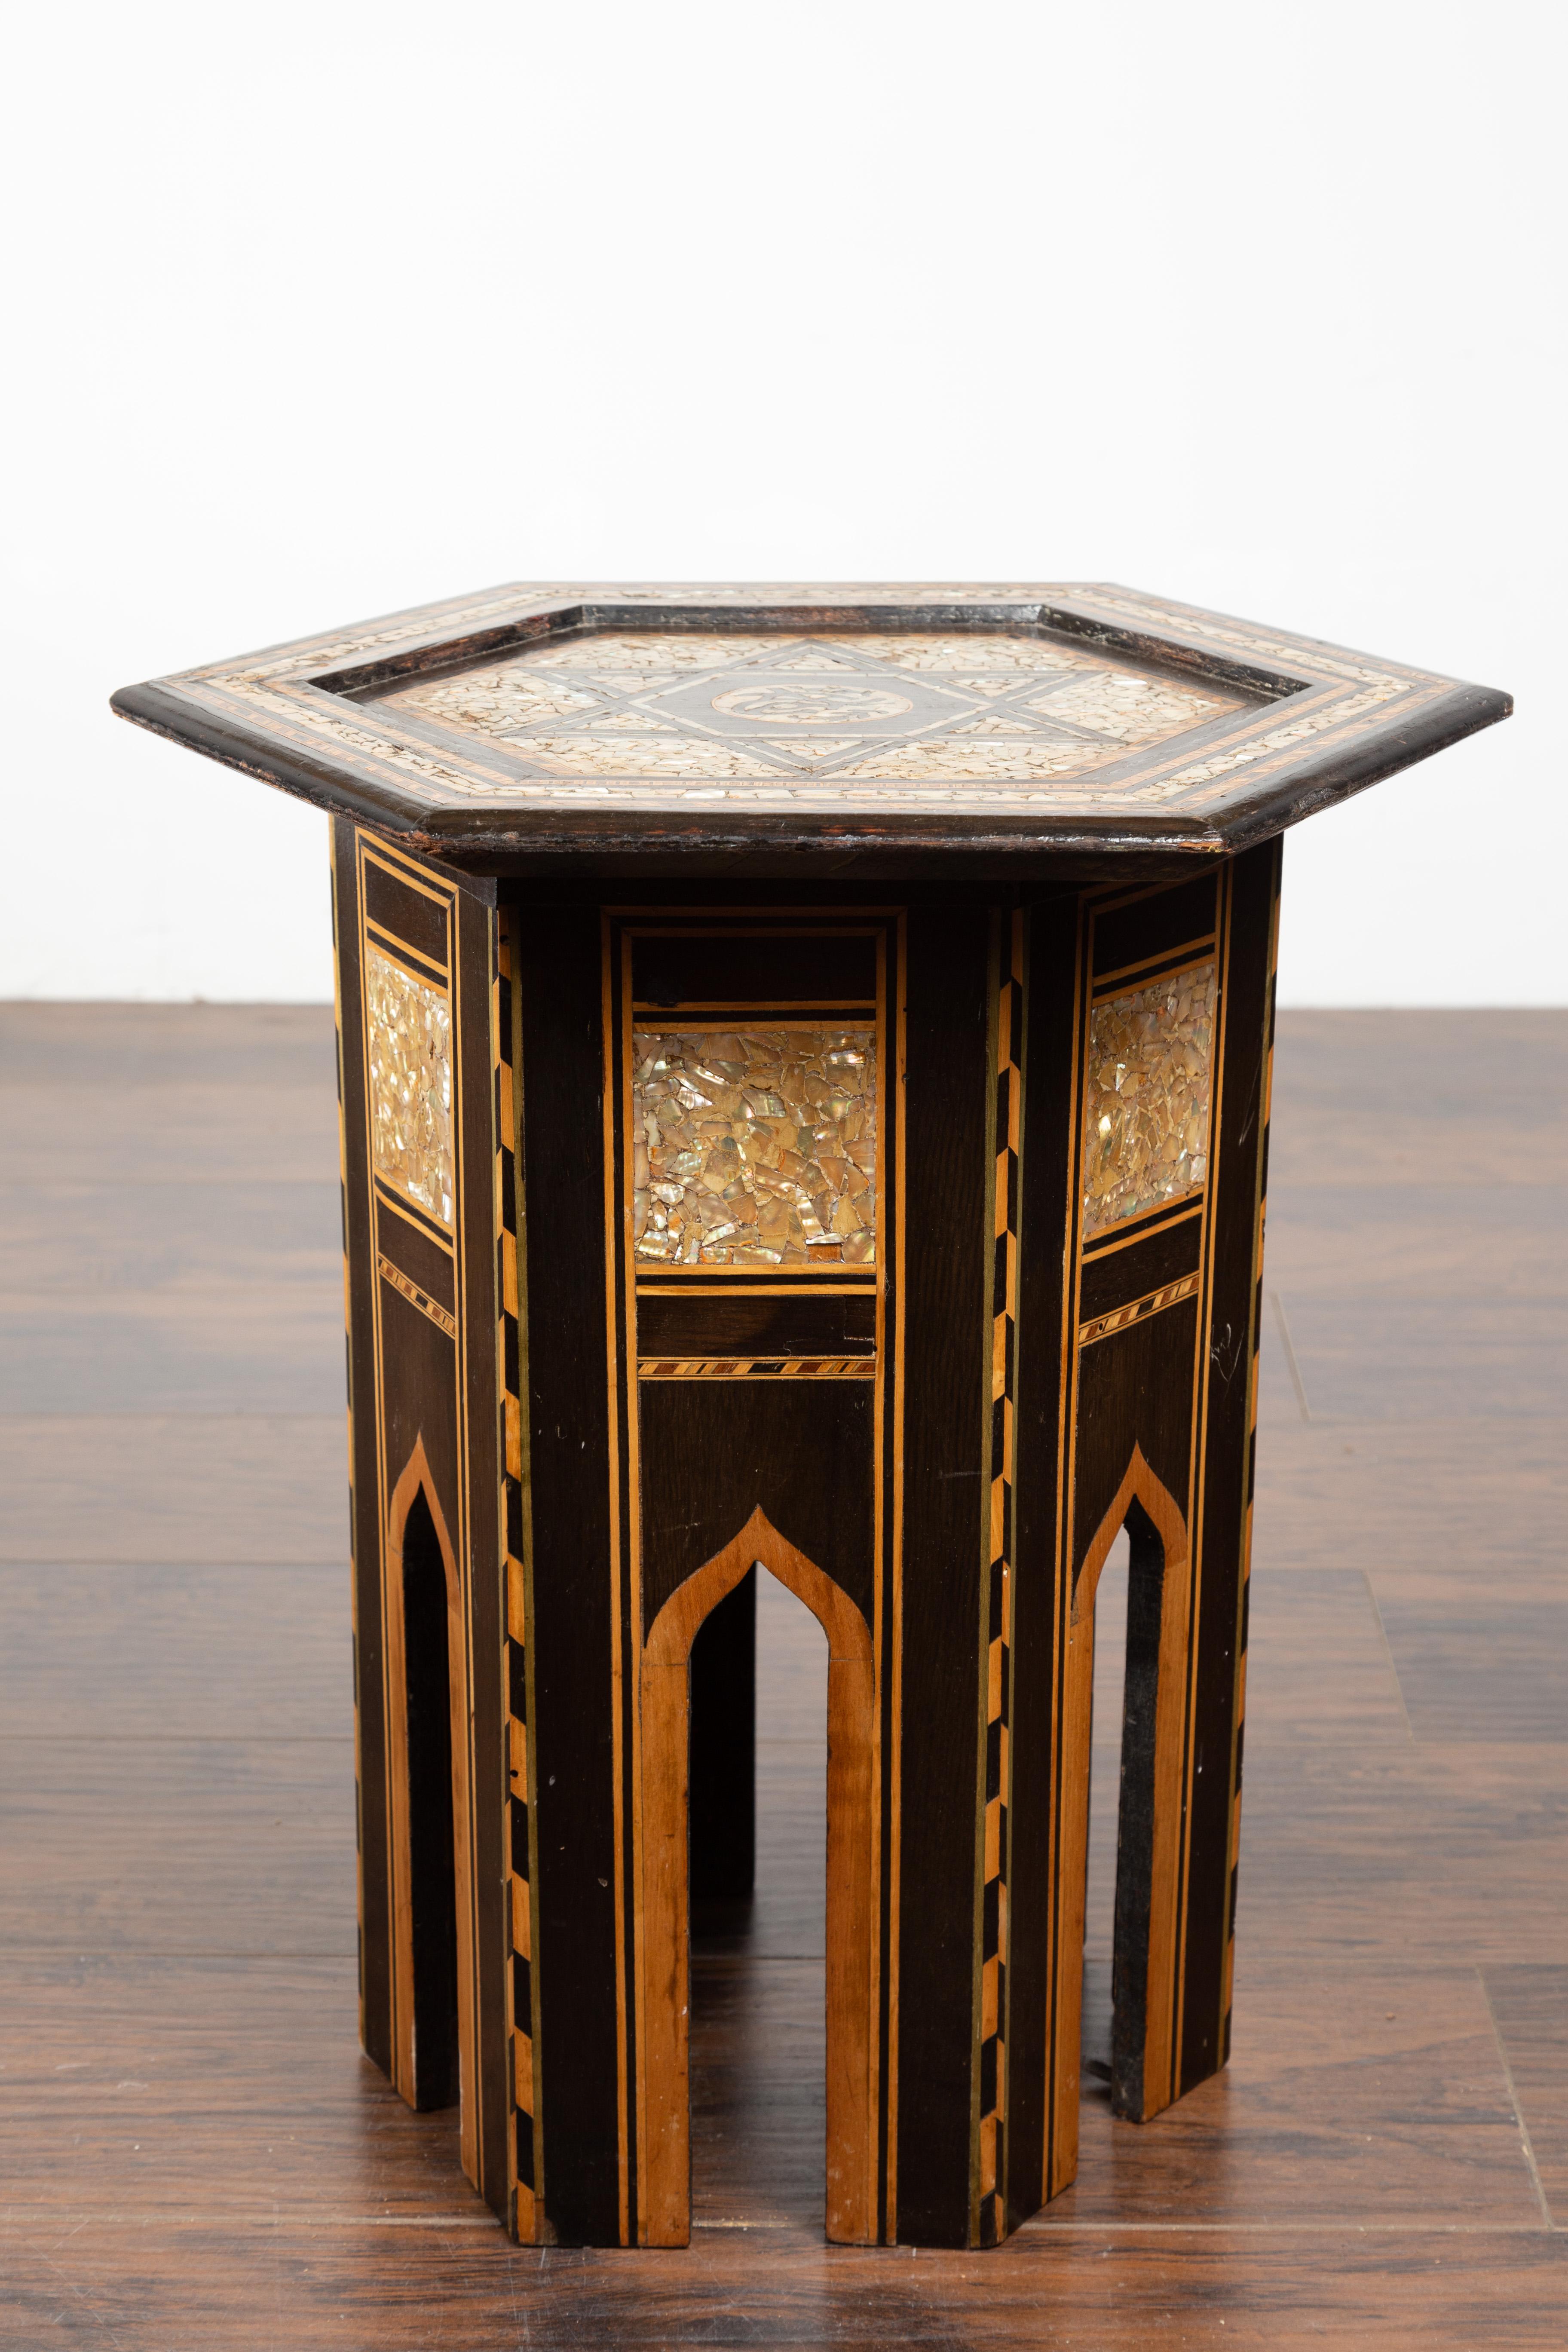 Moroccan Midcentury Side Table with Hexagonal Top and Mother-of-Pearl Inlay For Sale 5